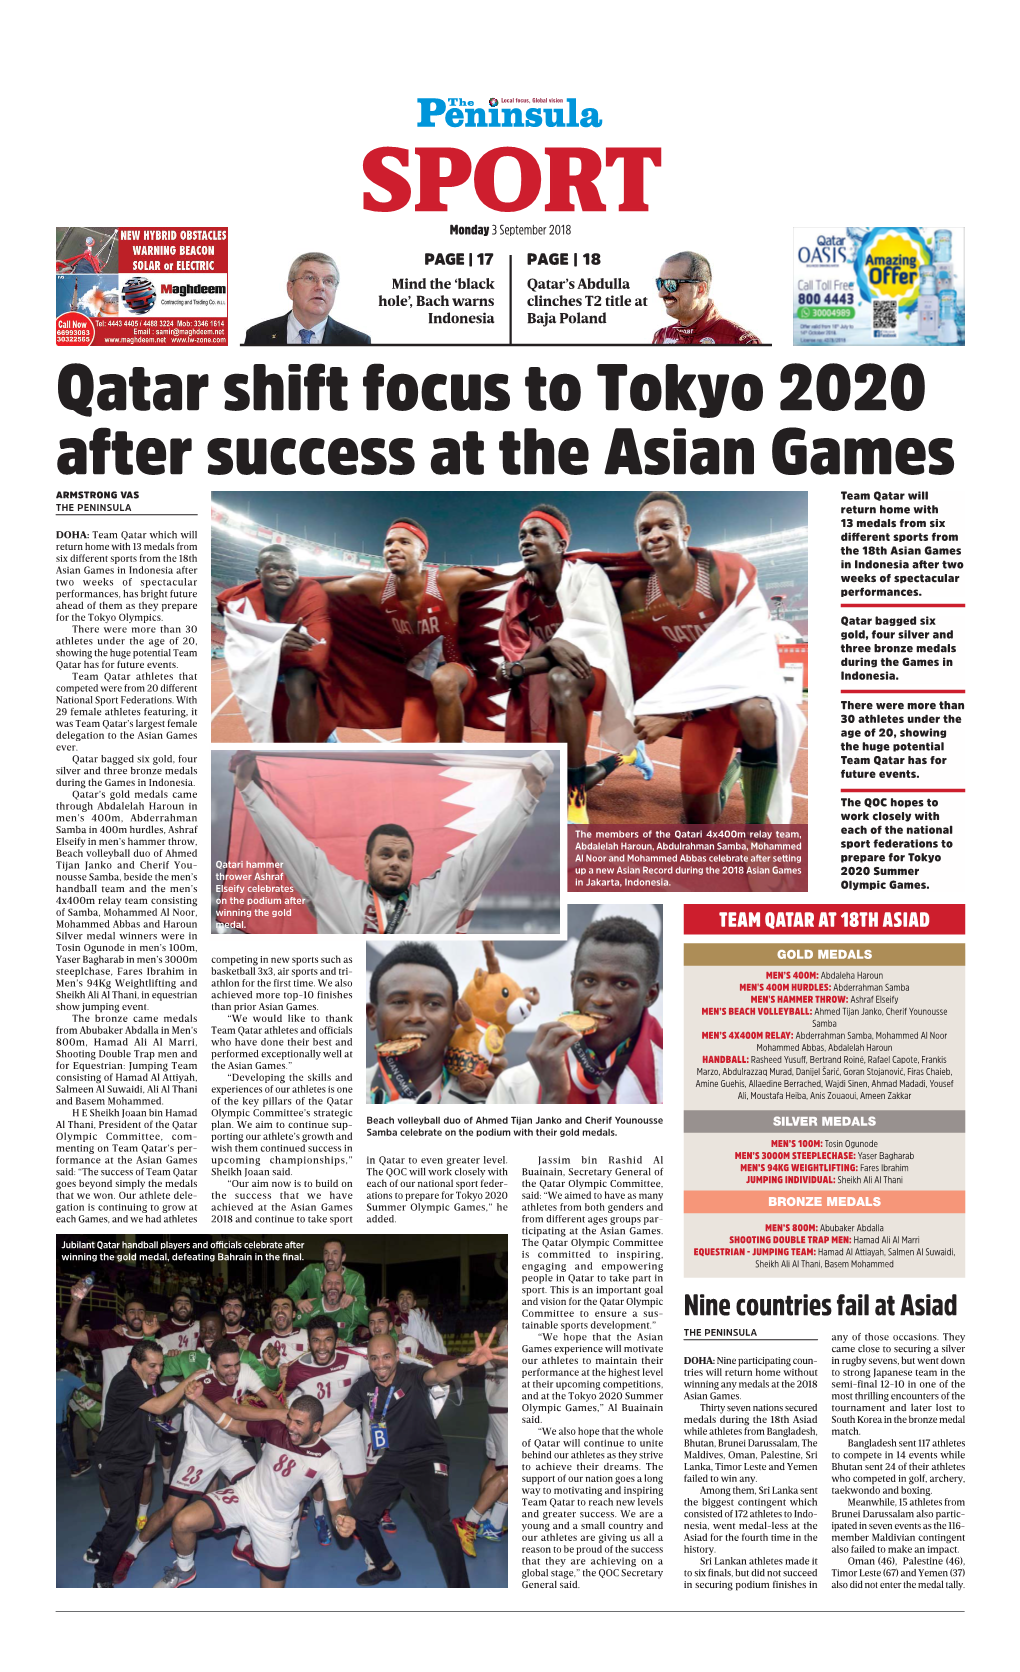 Qatar Shift Focus to Tokyo 2020 After Success at the Asian Games